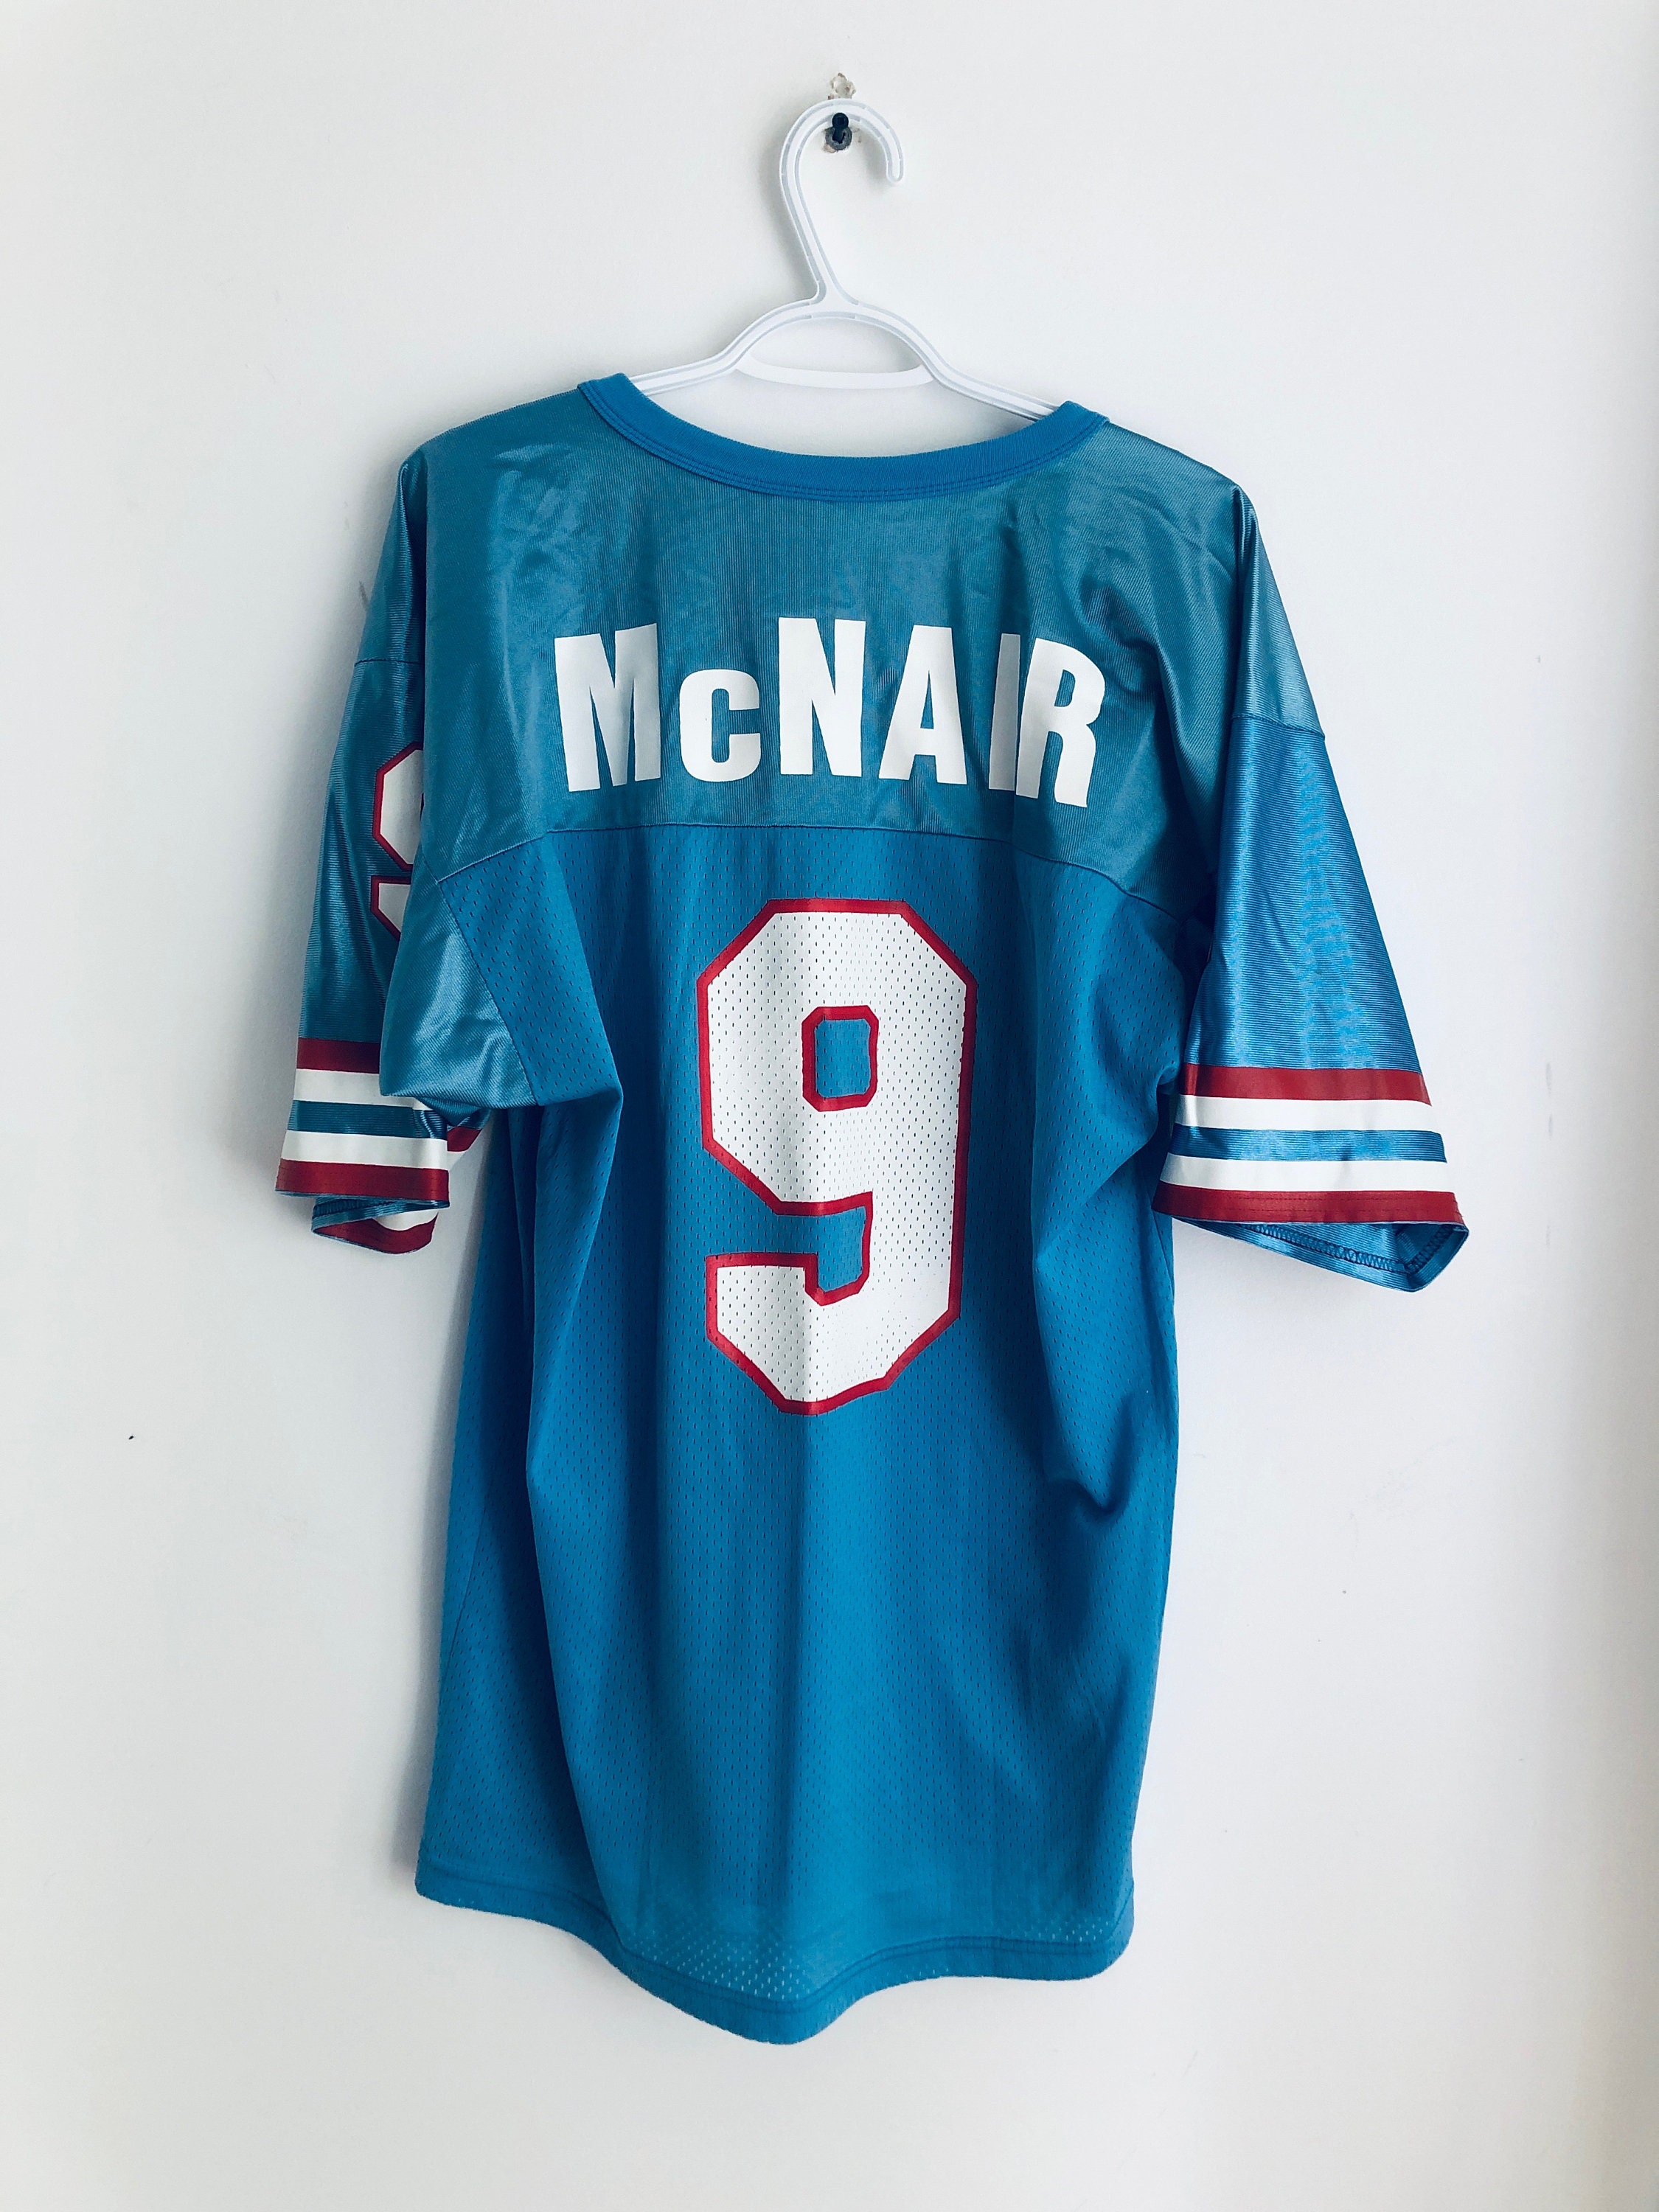 Men's Nike Steve McNair Light Blue Tennessee Titans Oilers Throwback Retired Player Game Jersey Size: Small